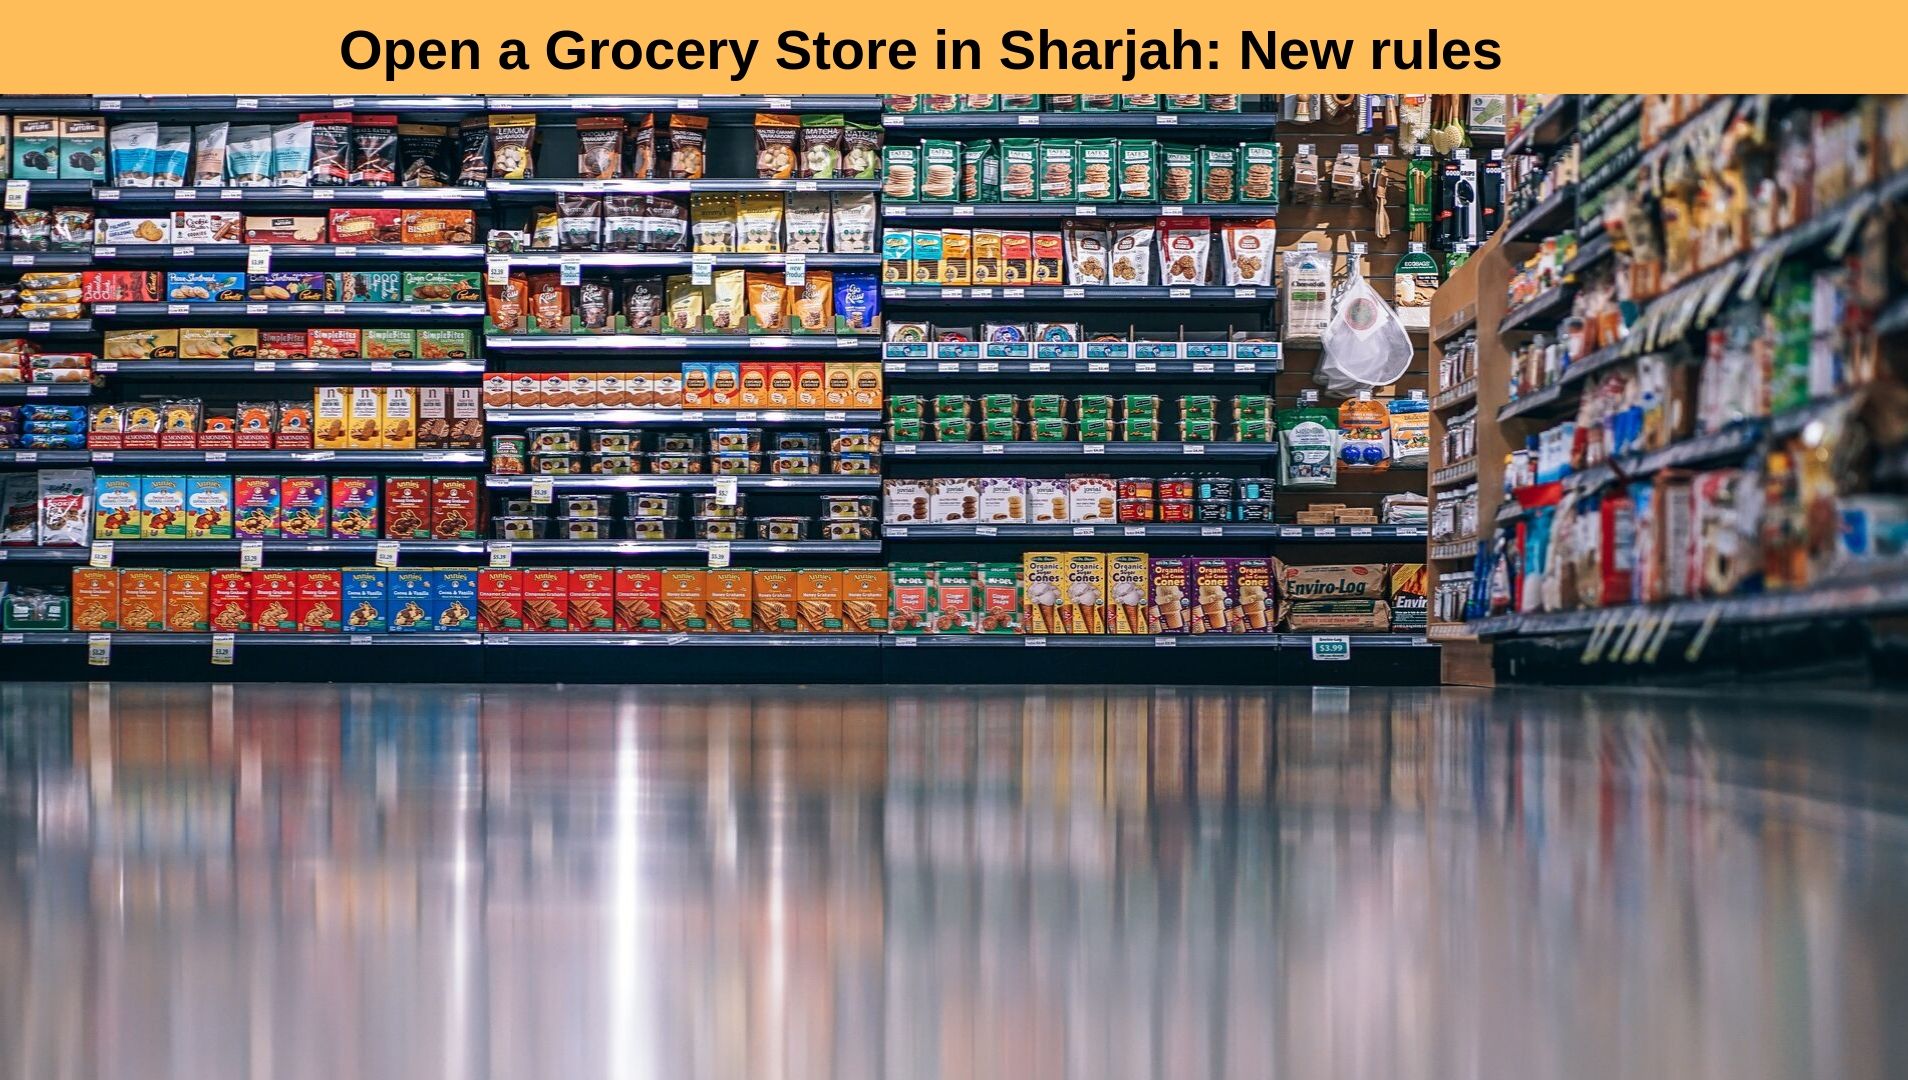 Open a Grocery Store in Sharjah